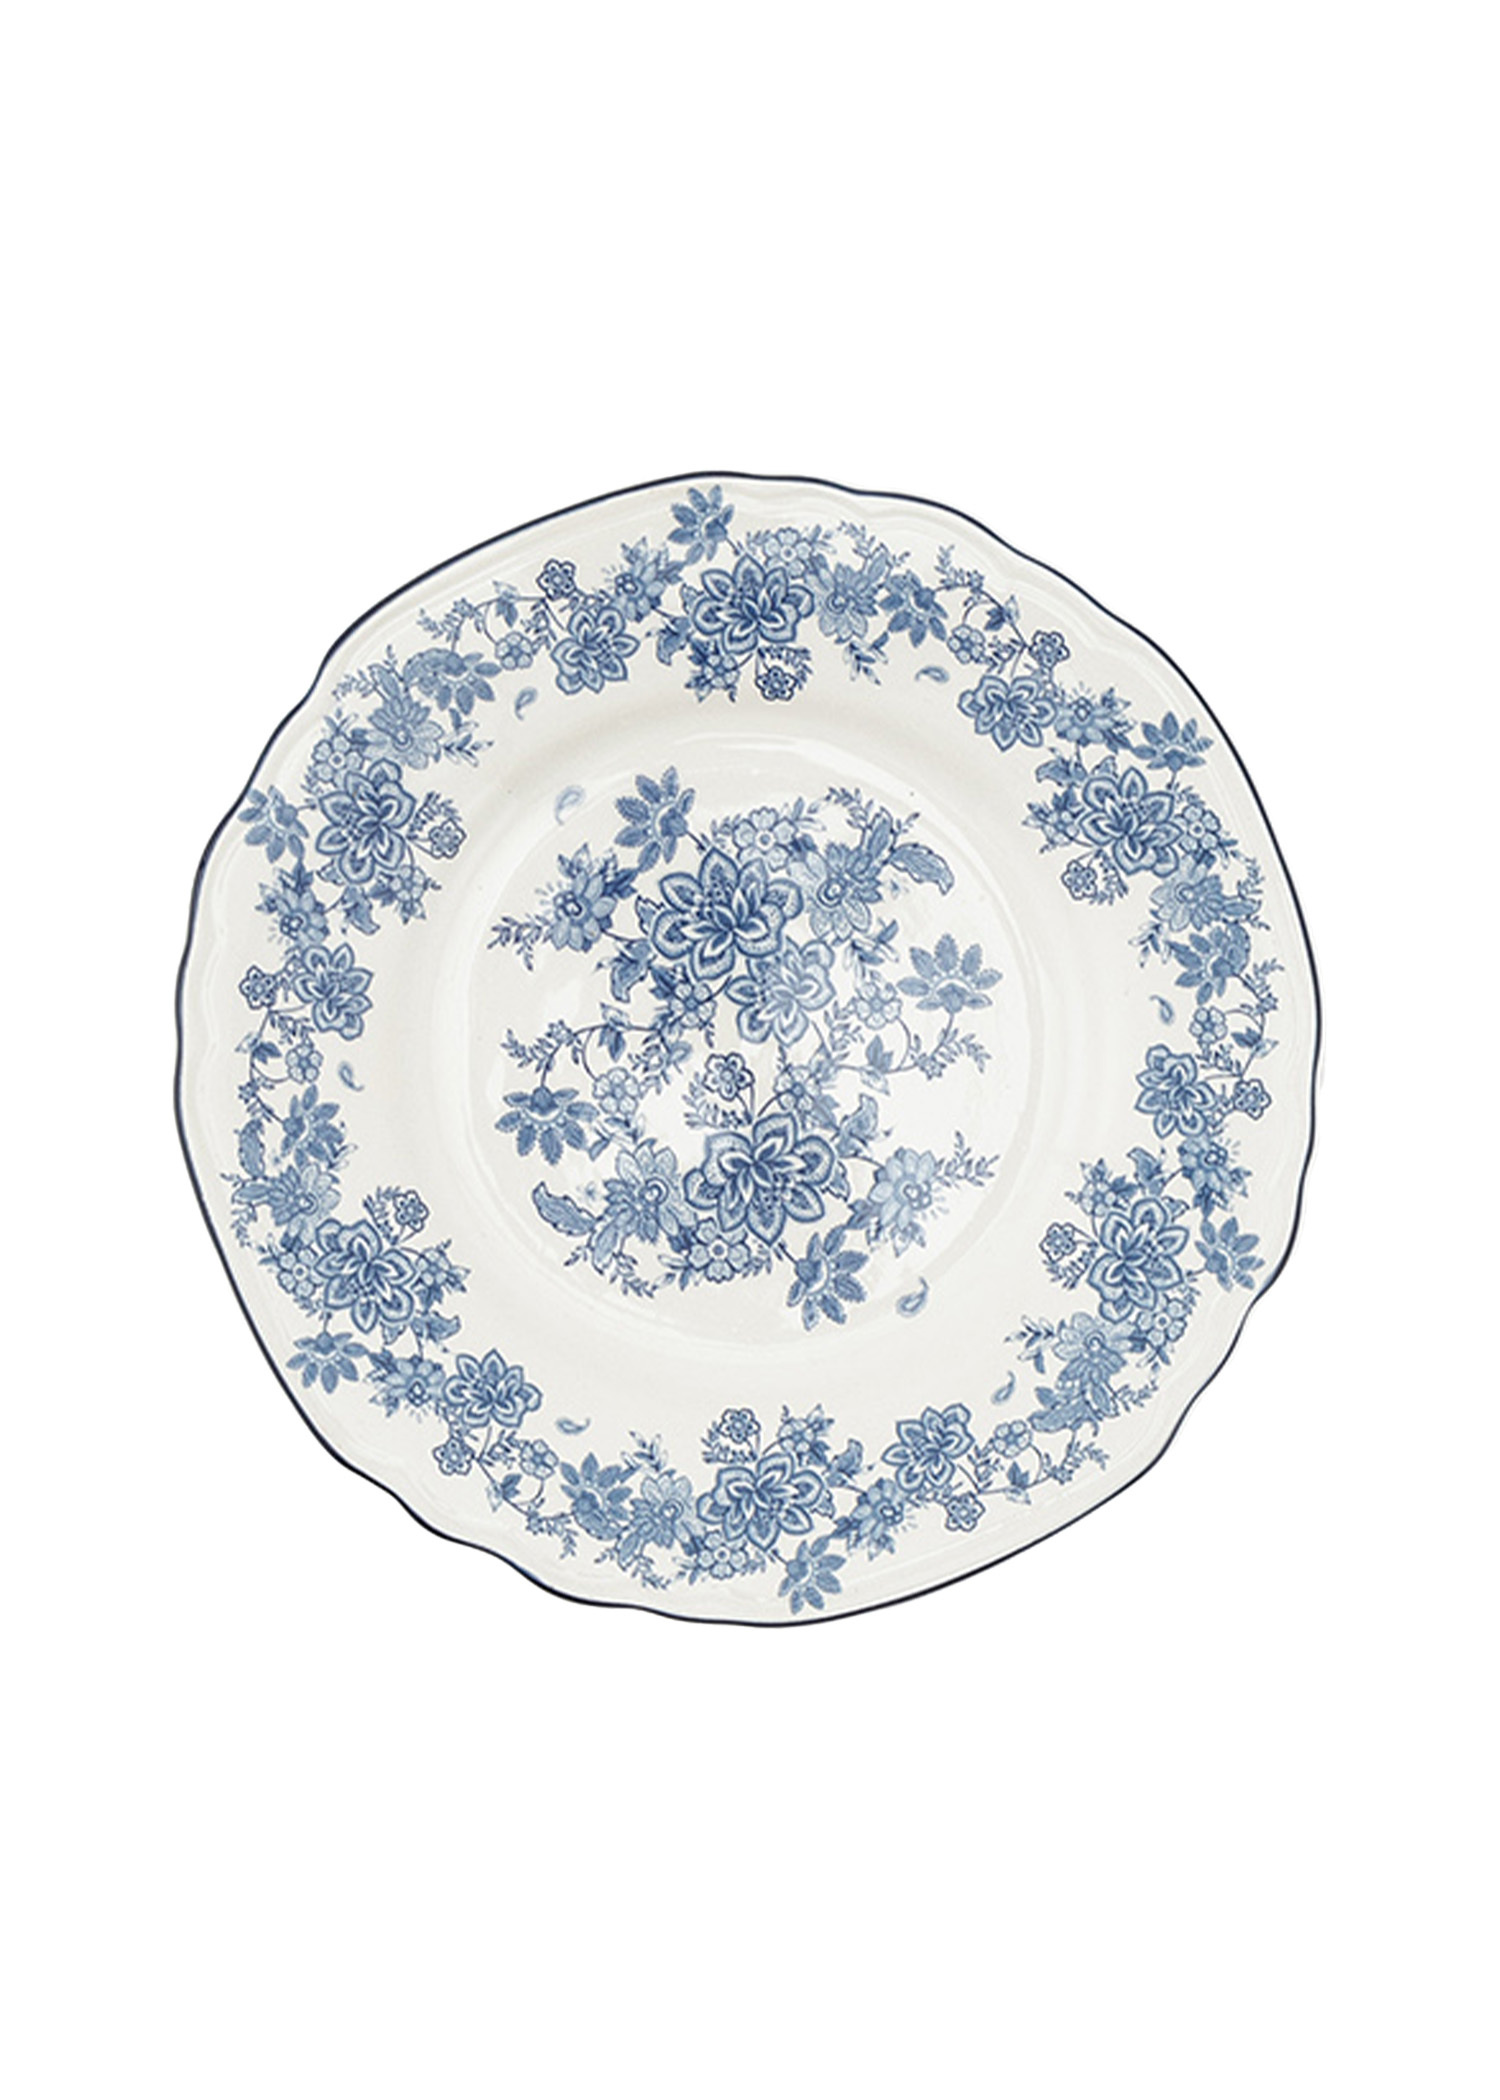 Floral stoneware side plate